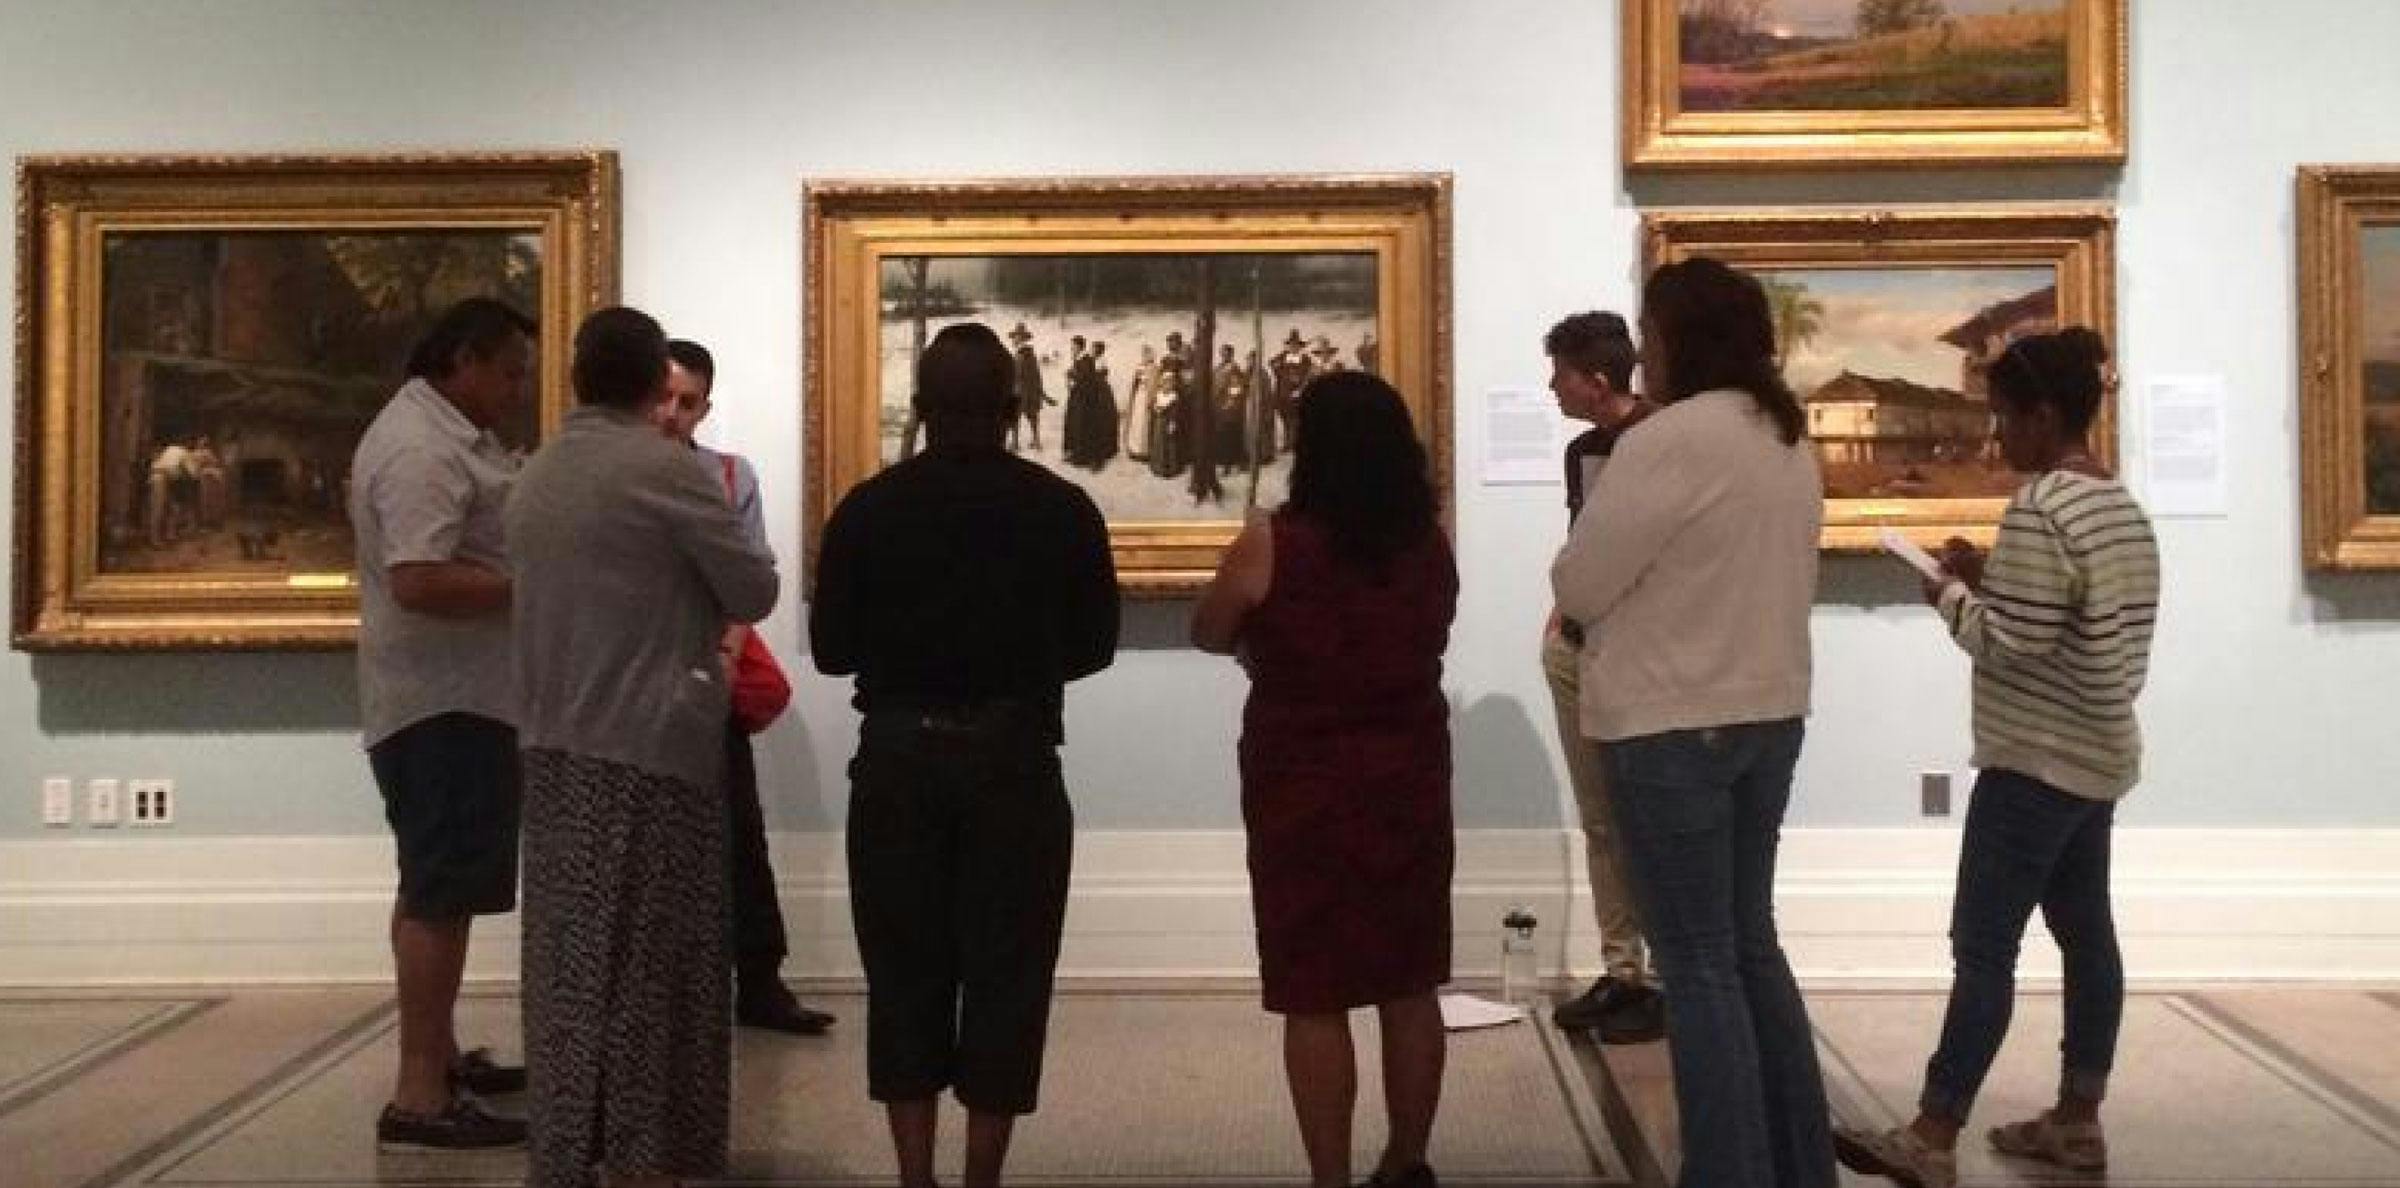 group of museum-goers circled around a painting in a gallery room